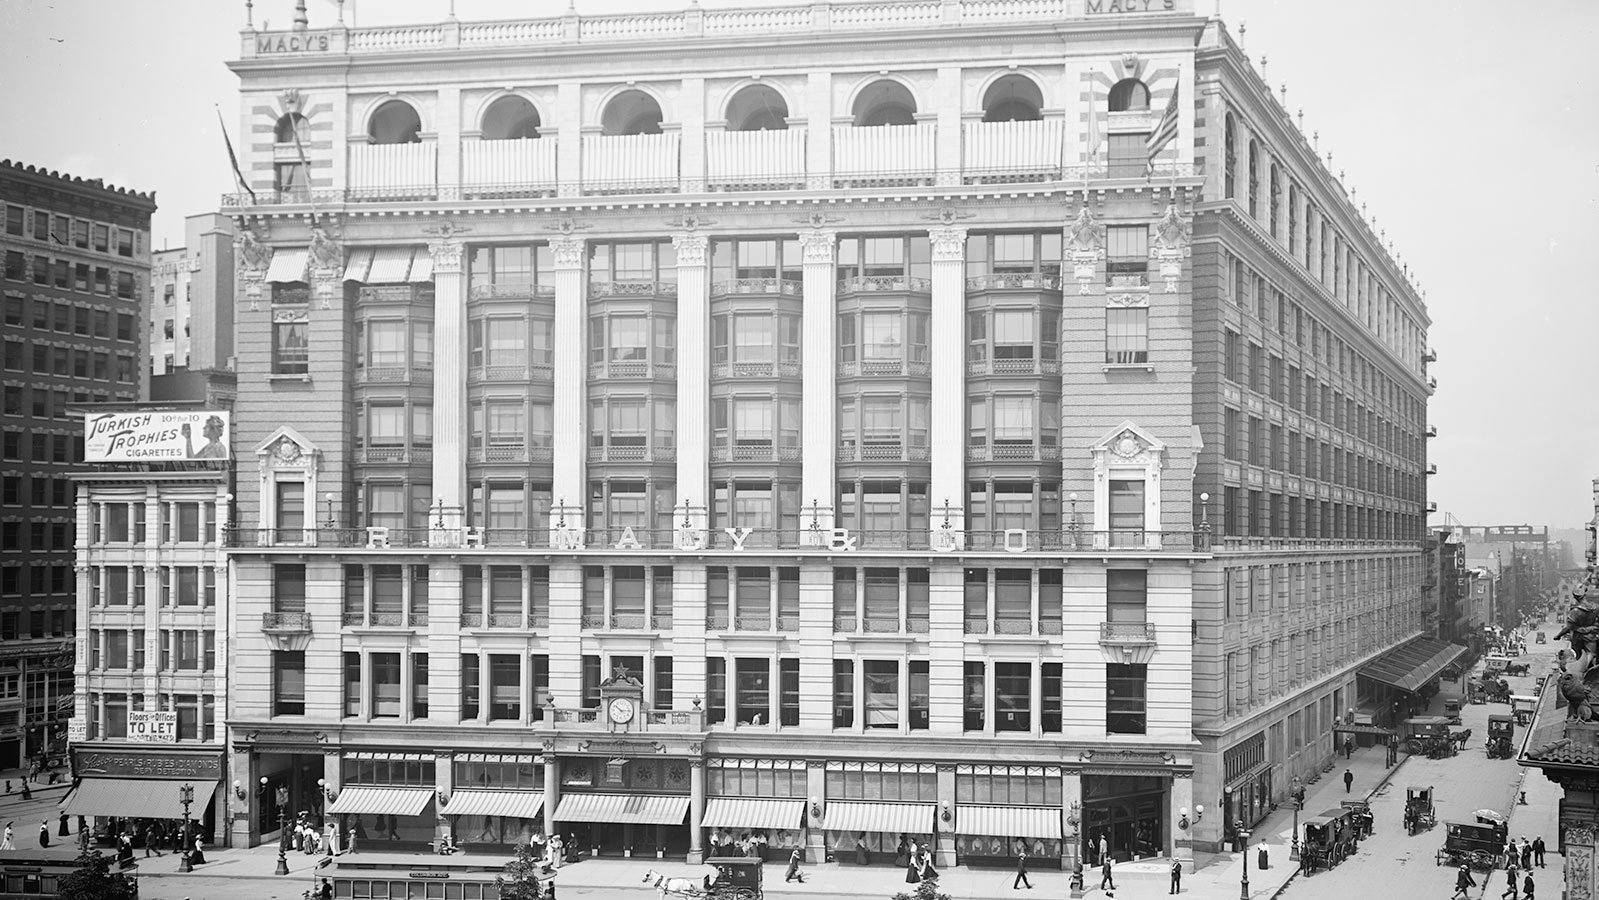 R. H. Macy and Co., on Broadway and West 34th Street, circa 1905